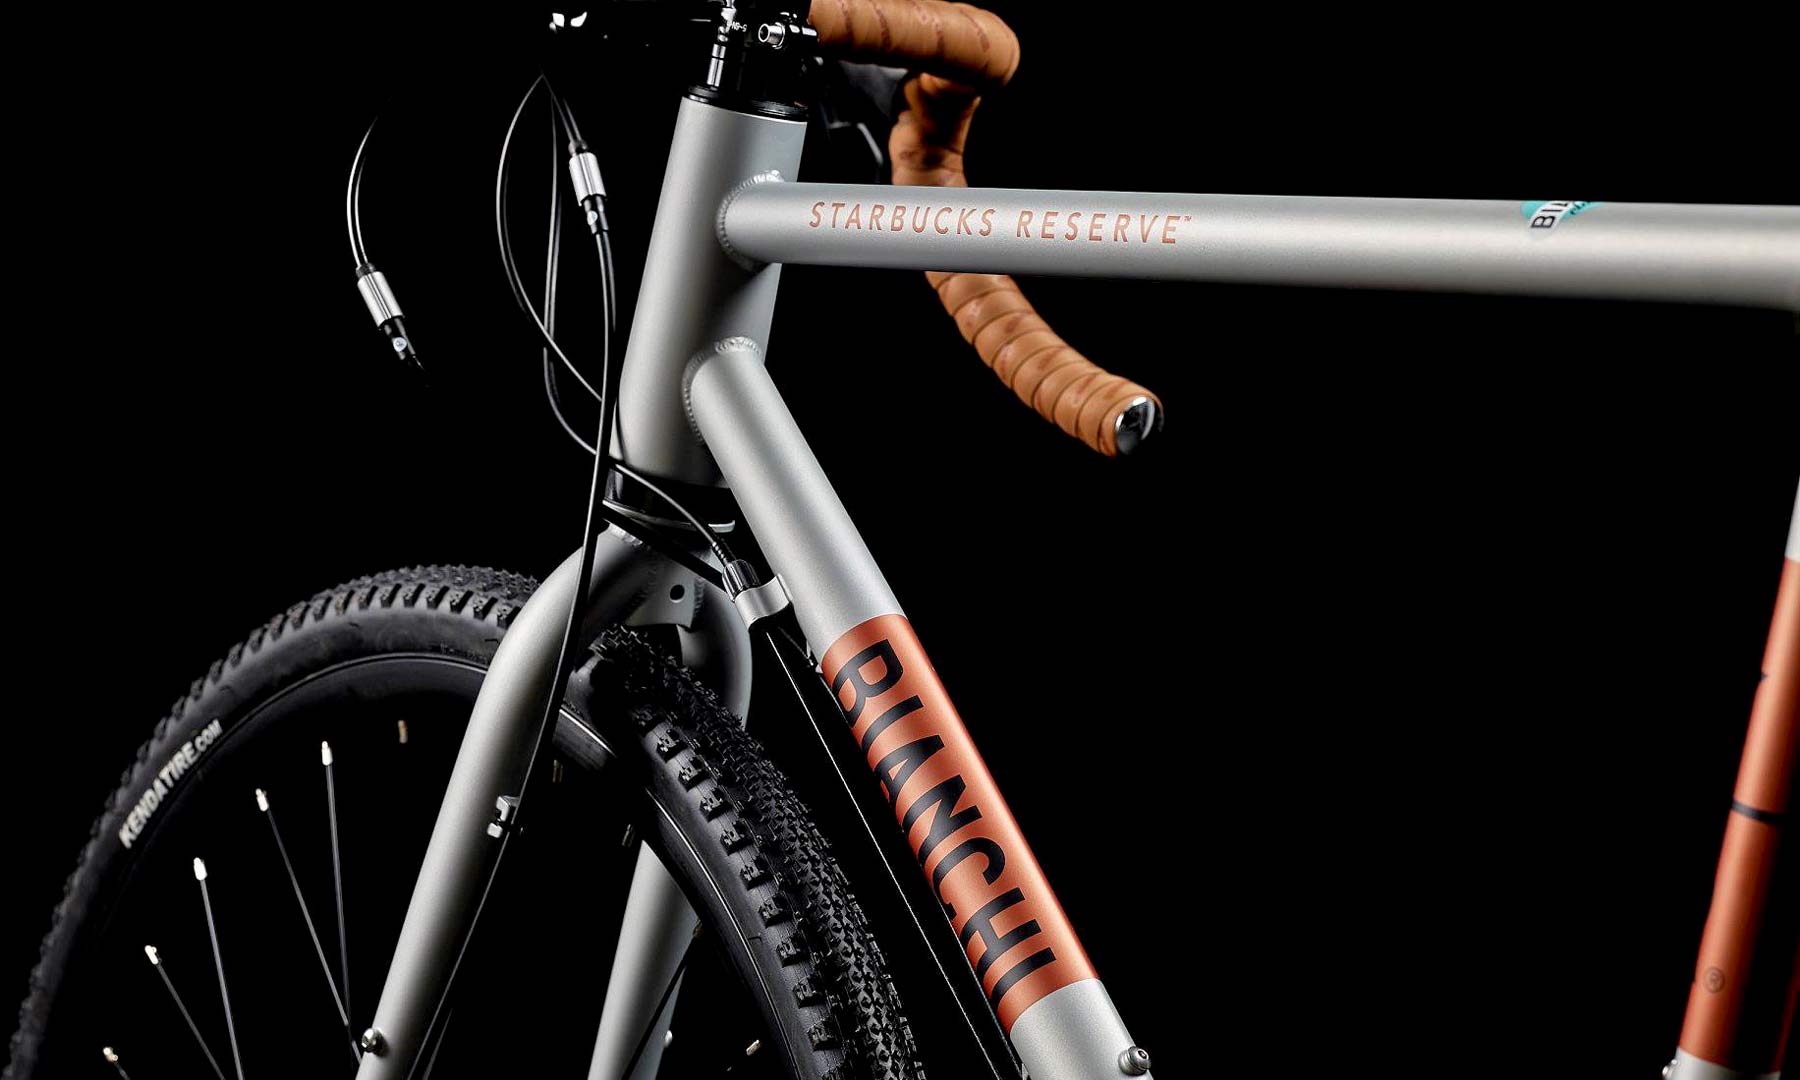 Bianchi Starbucks Reserve collabo, limited edition steel all-road adventure touring gravel bike